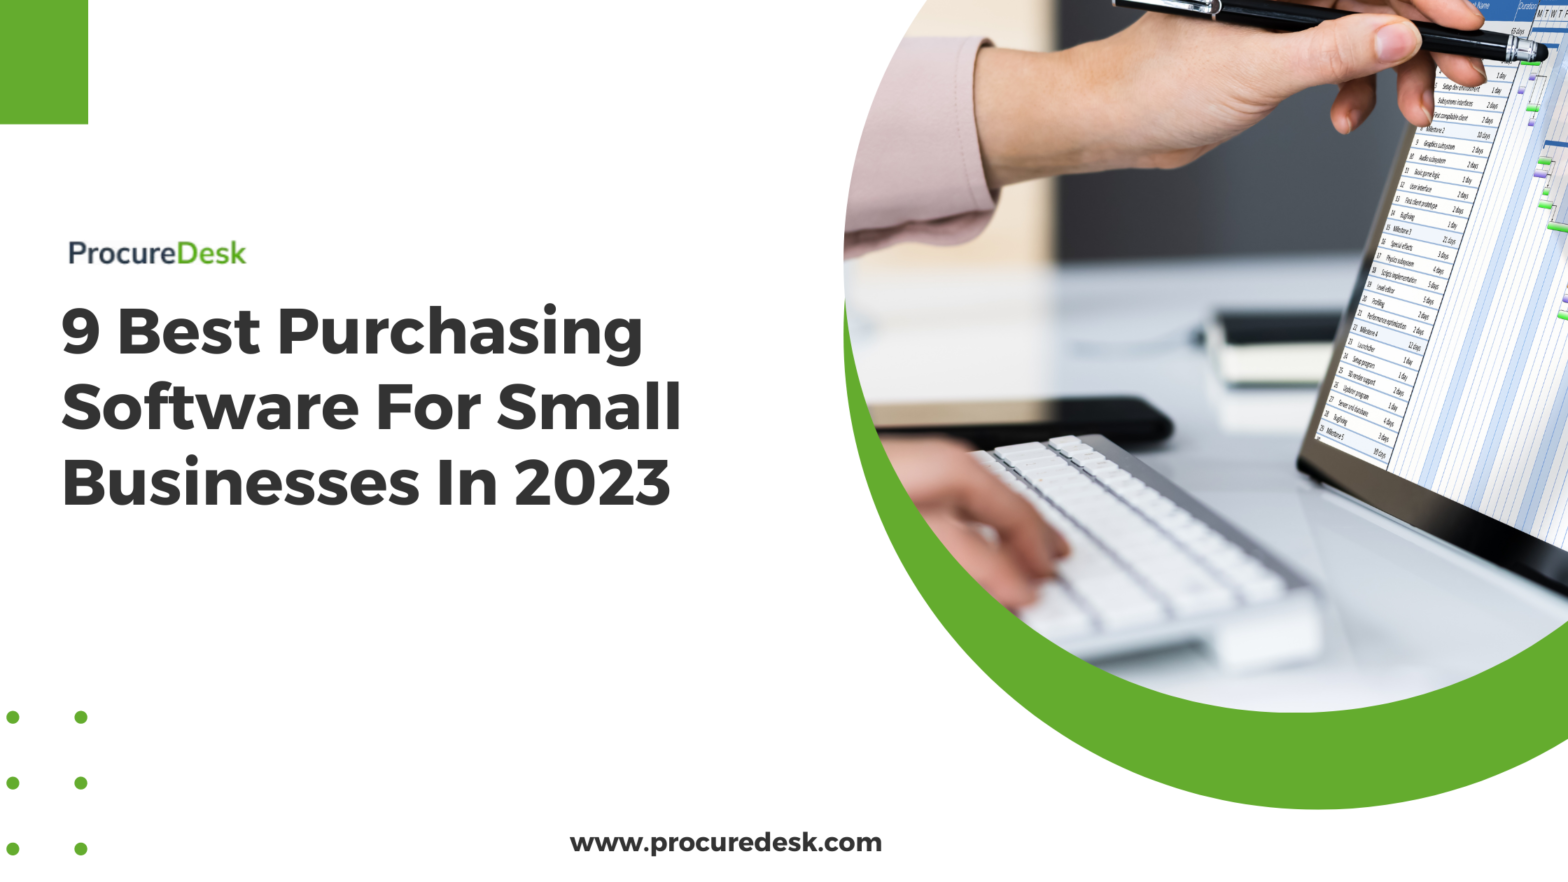 9 Best Purchasing Software For Small Businesses In 2023